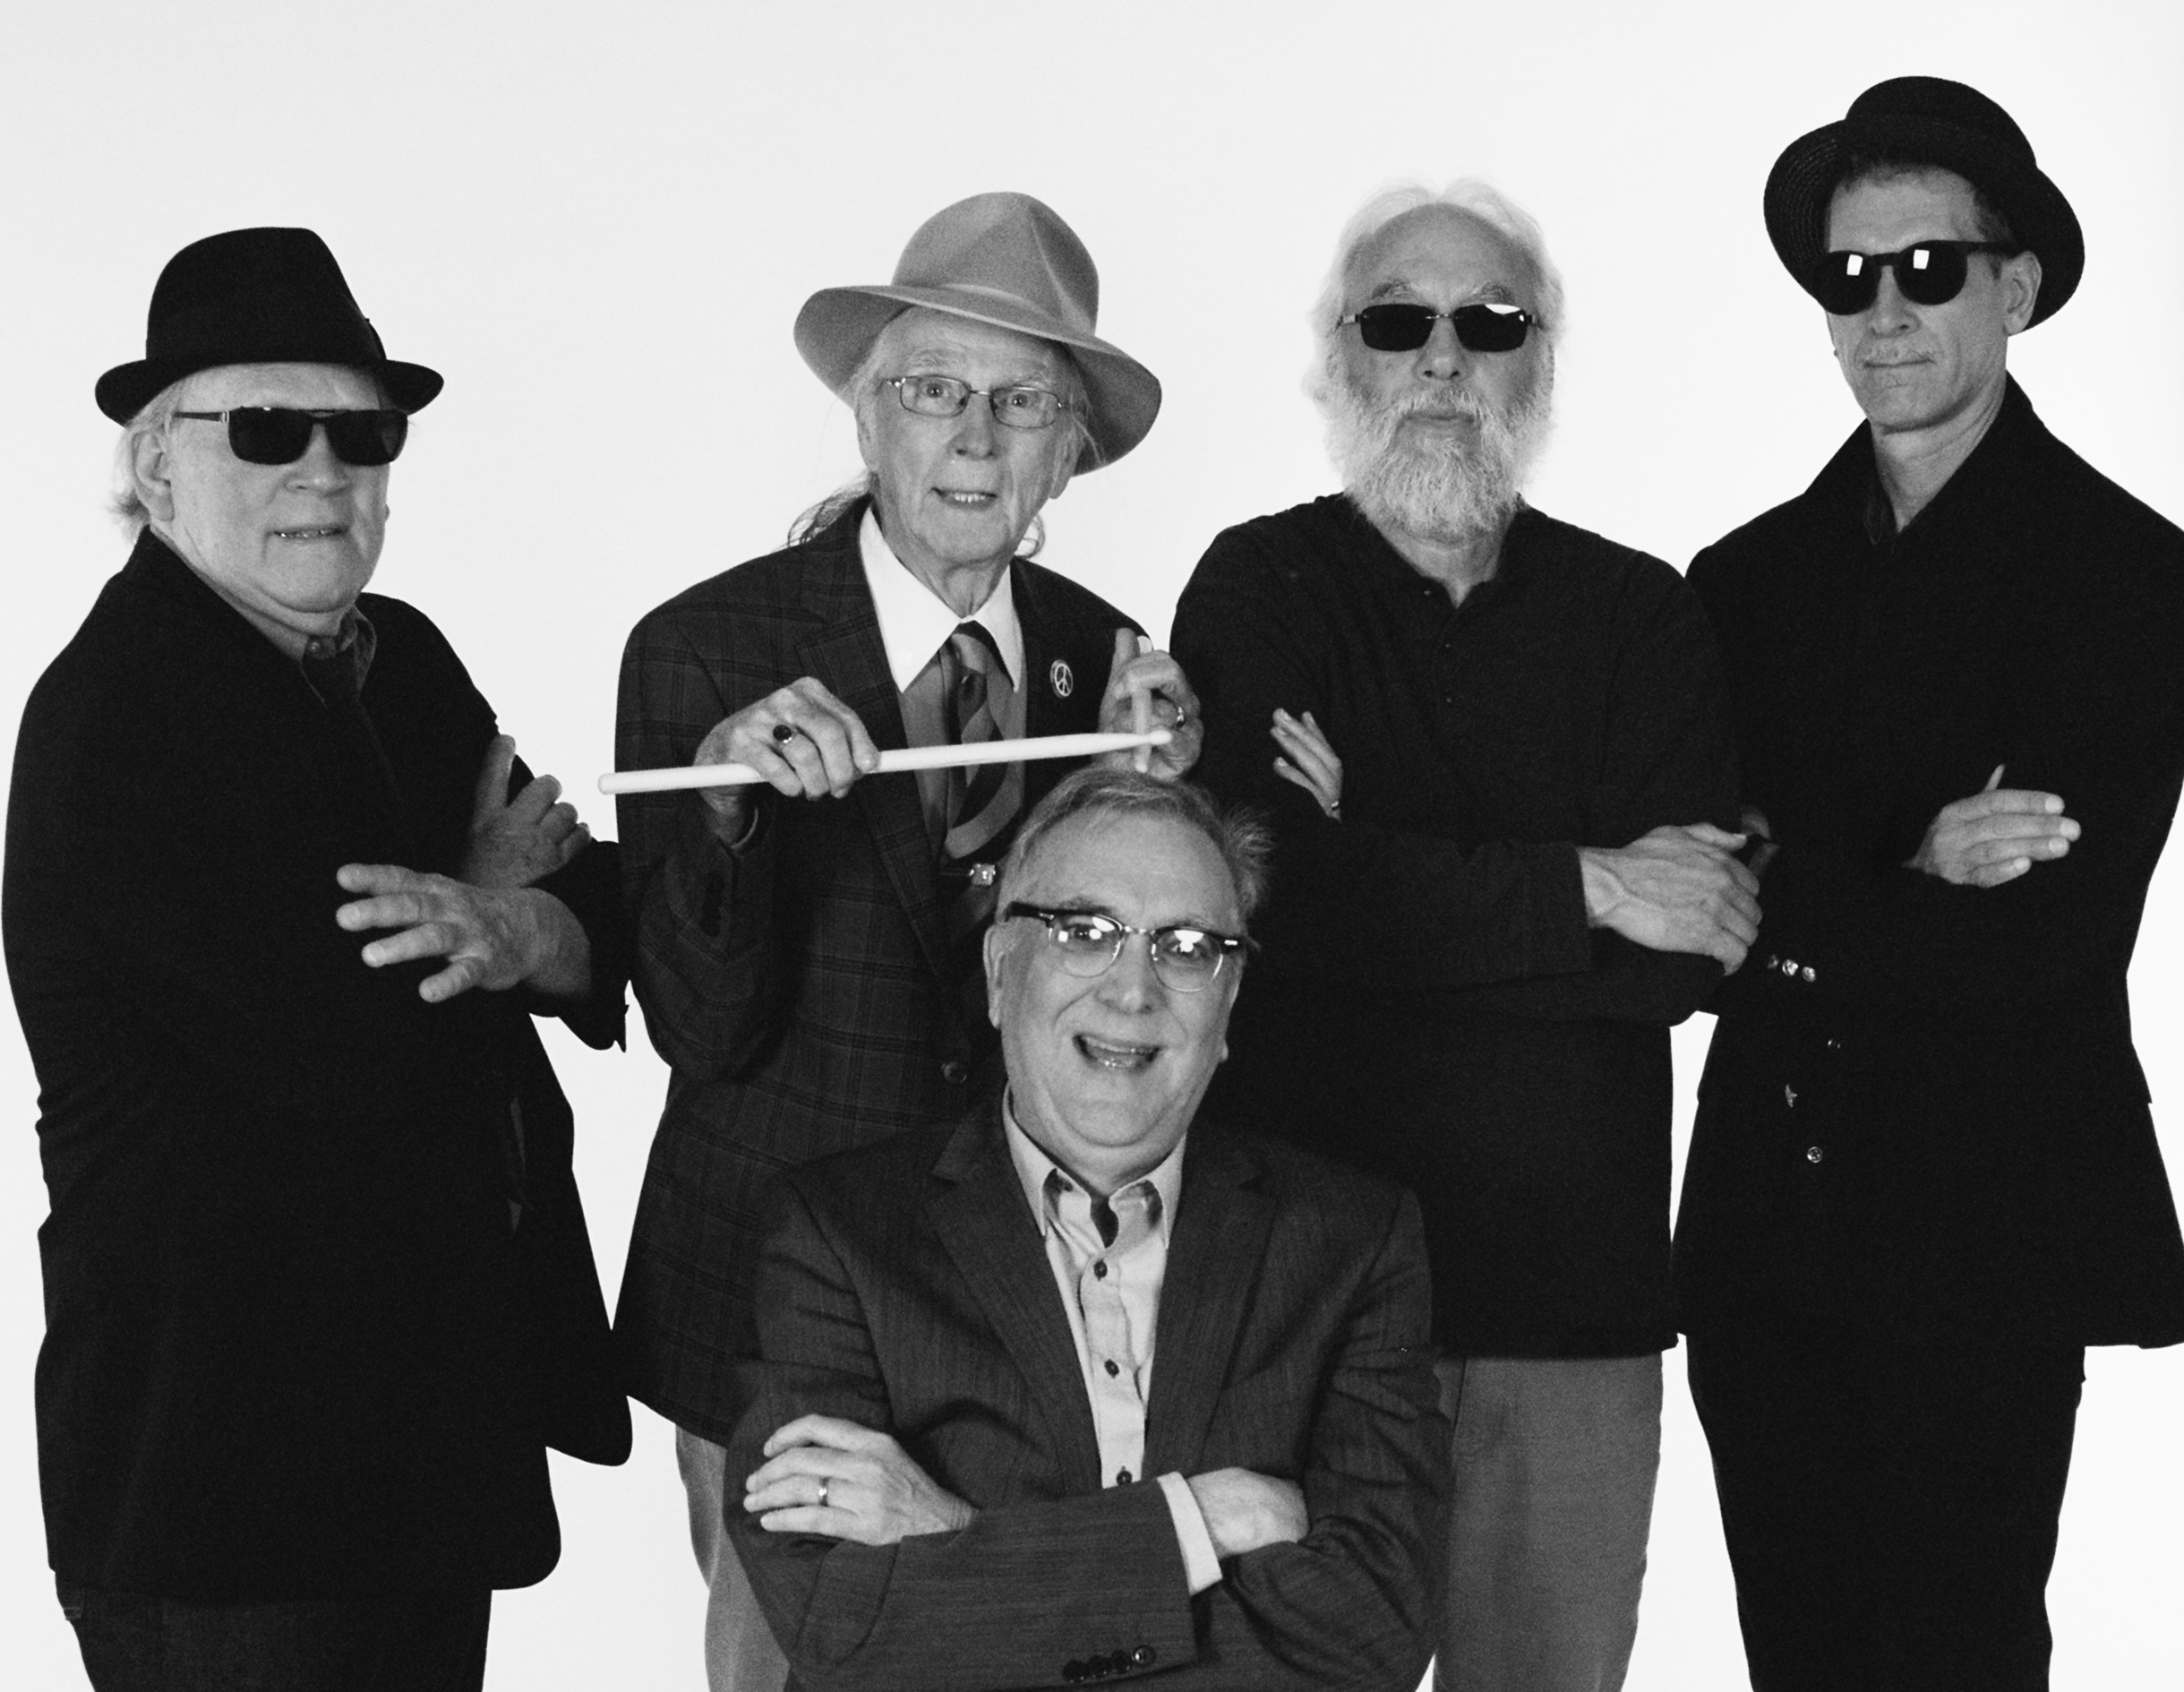 A promotional picture for The Bob Stewart Band.